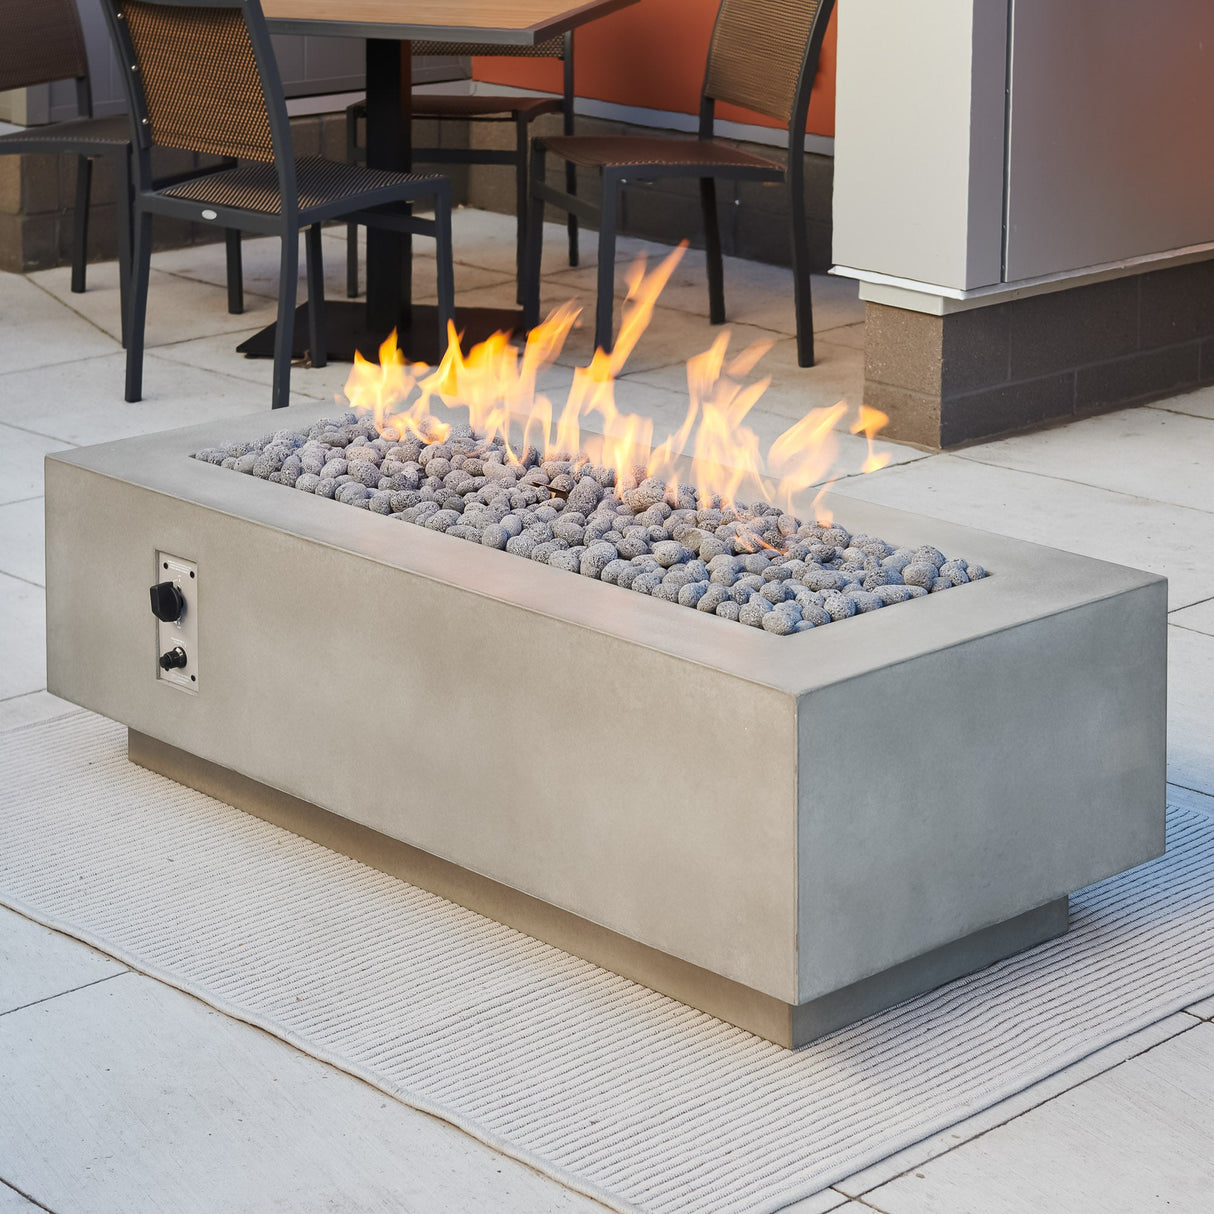 Lava rocks and a large flame on the Natural Grey Cove Linear Gas Fire Pit Table 54"